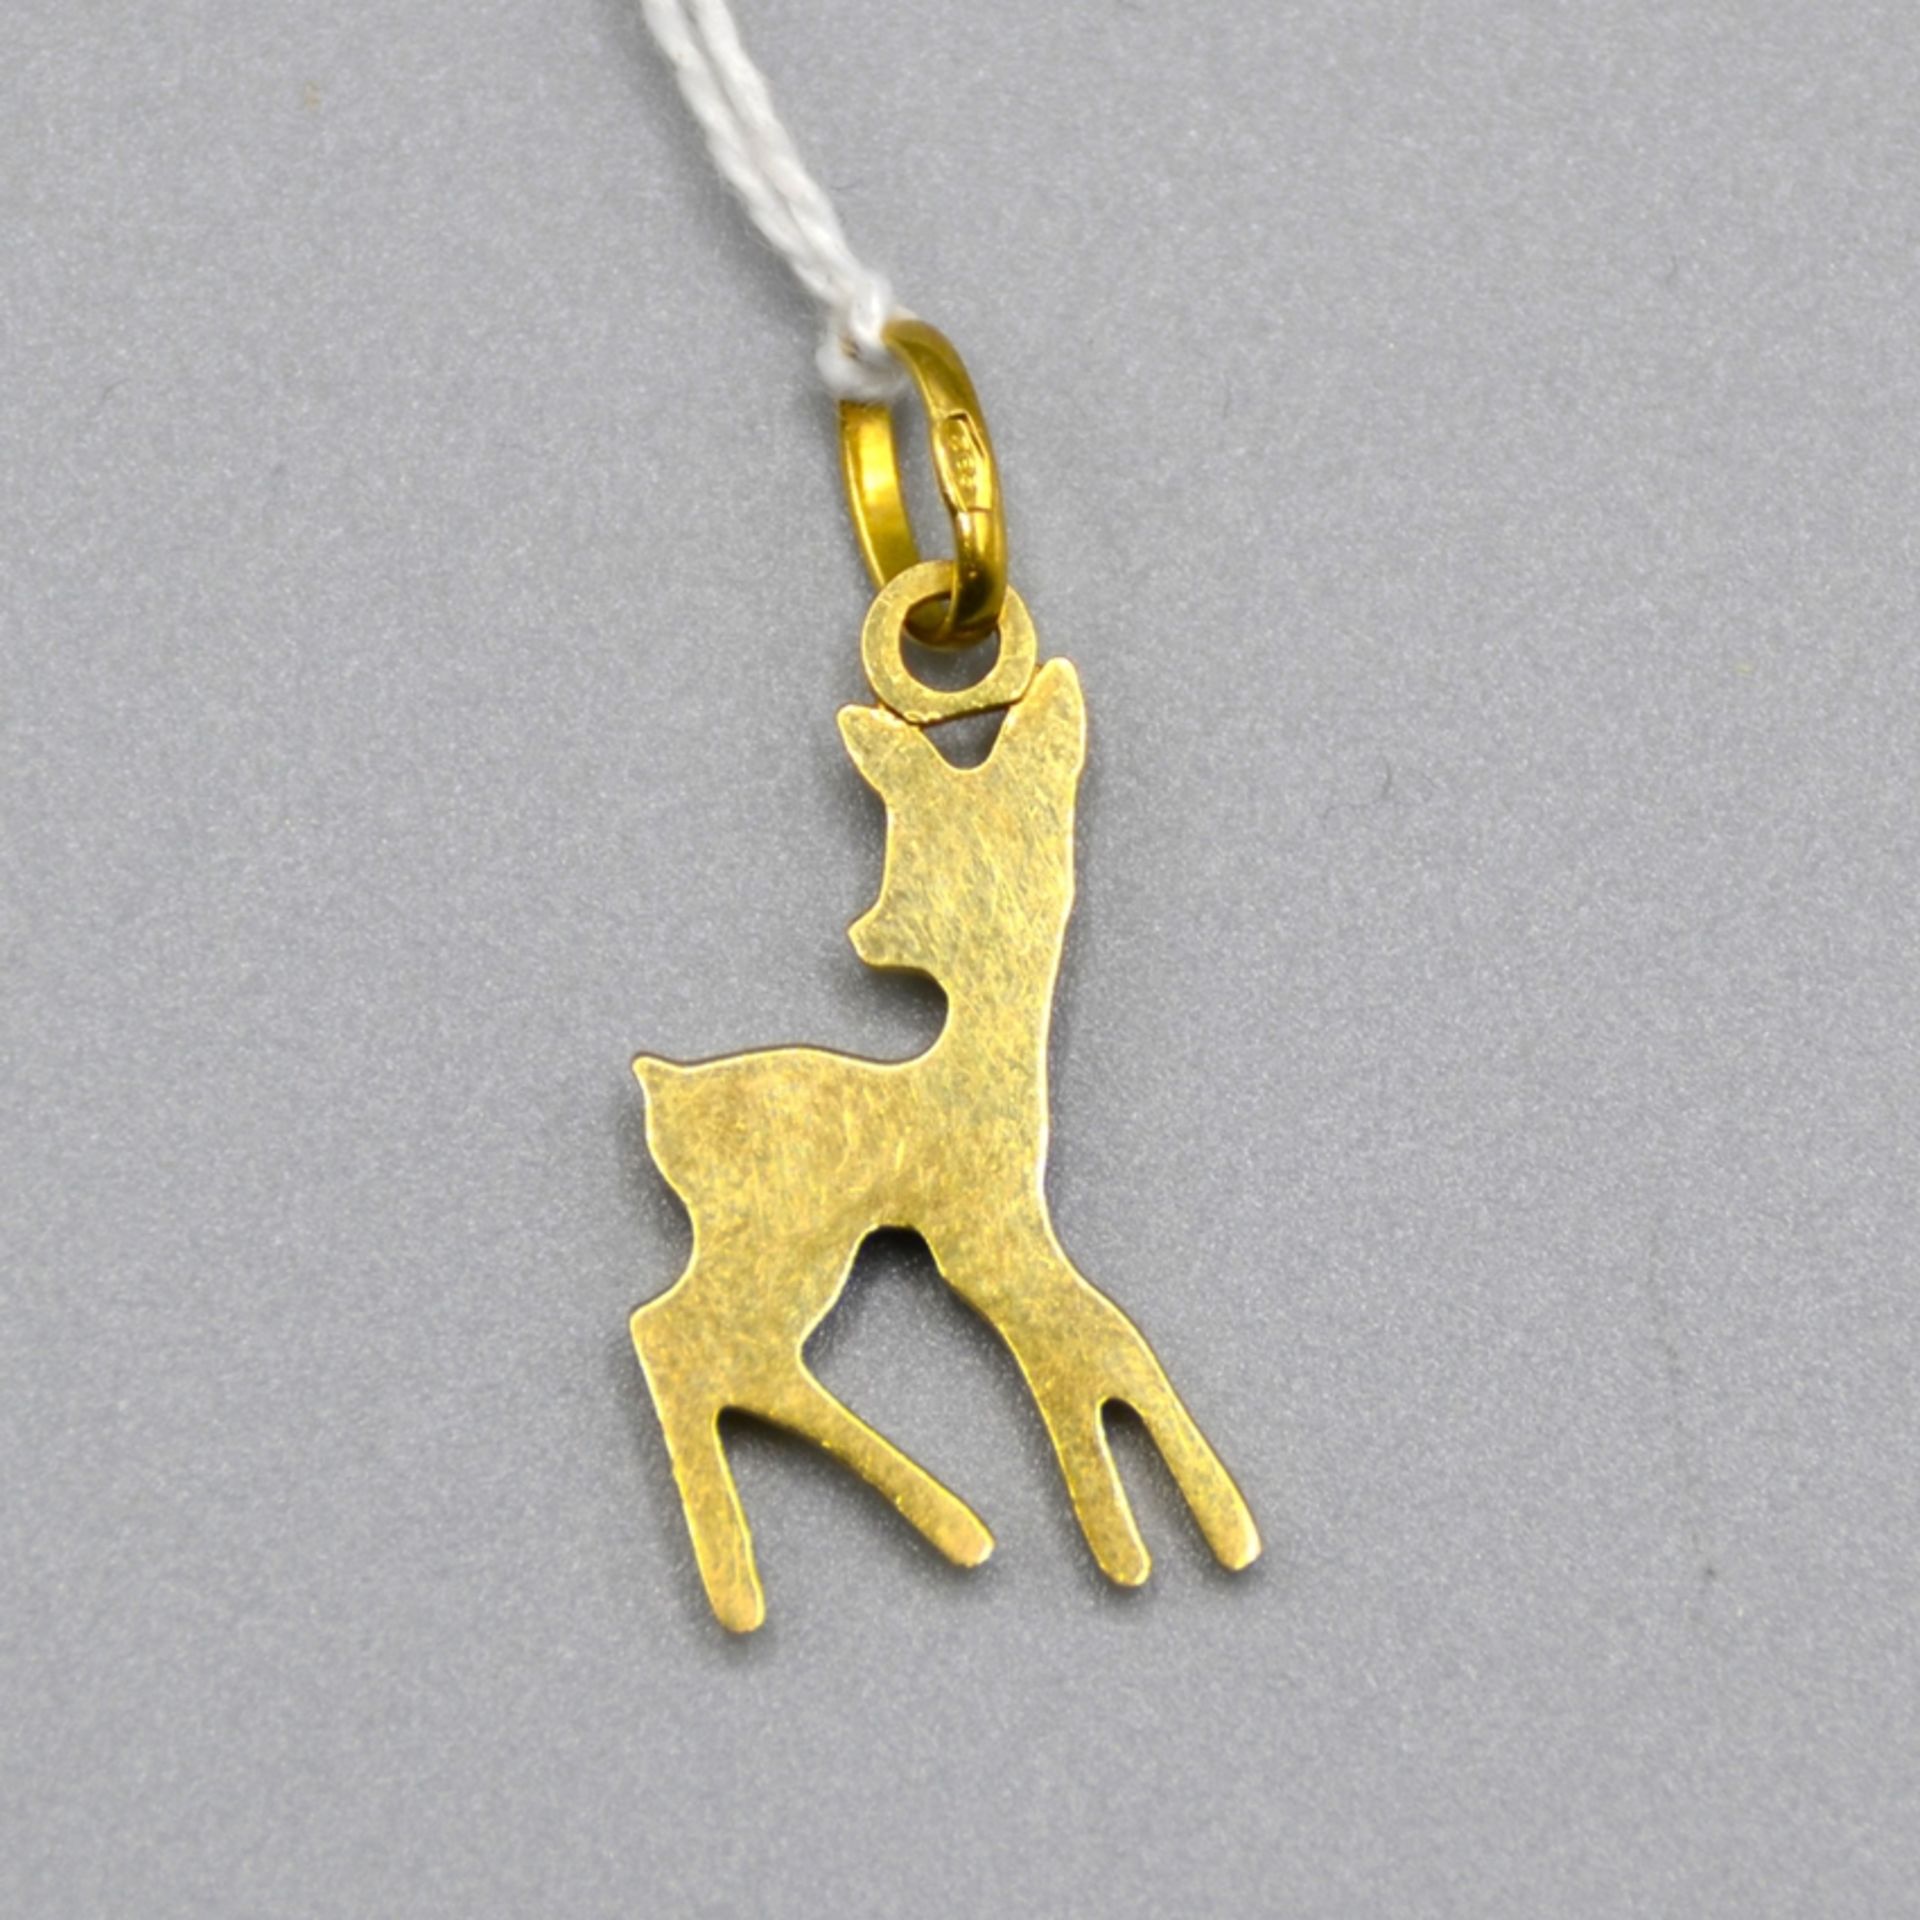 Bambi Rehlein Anhänger 585 Gold, ca. 2,3 cm, 2,3 g - Image 2 of 2